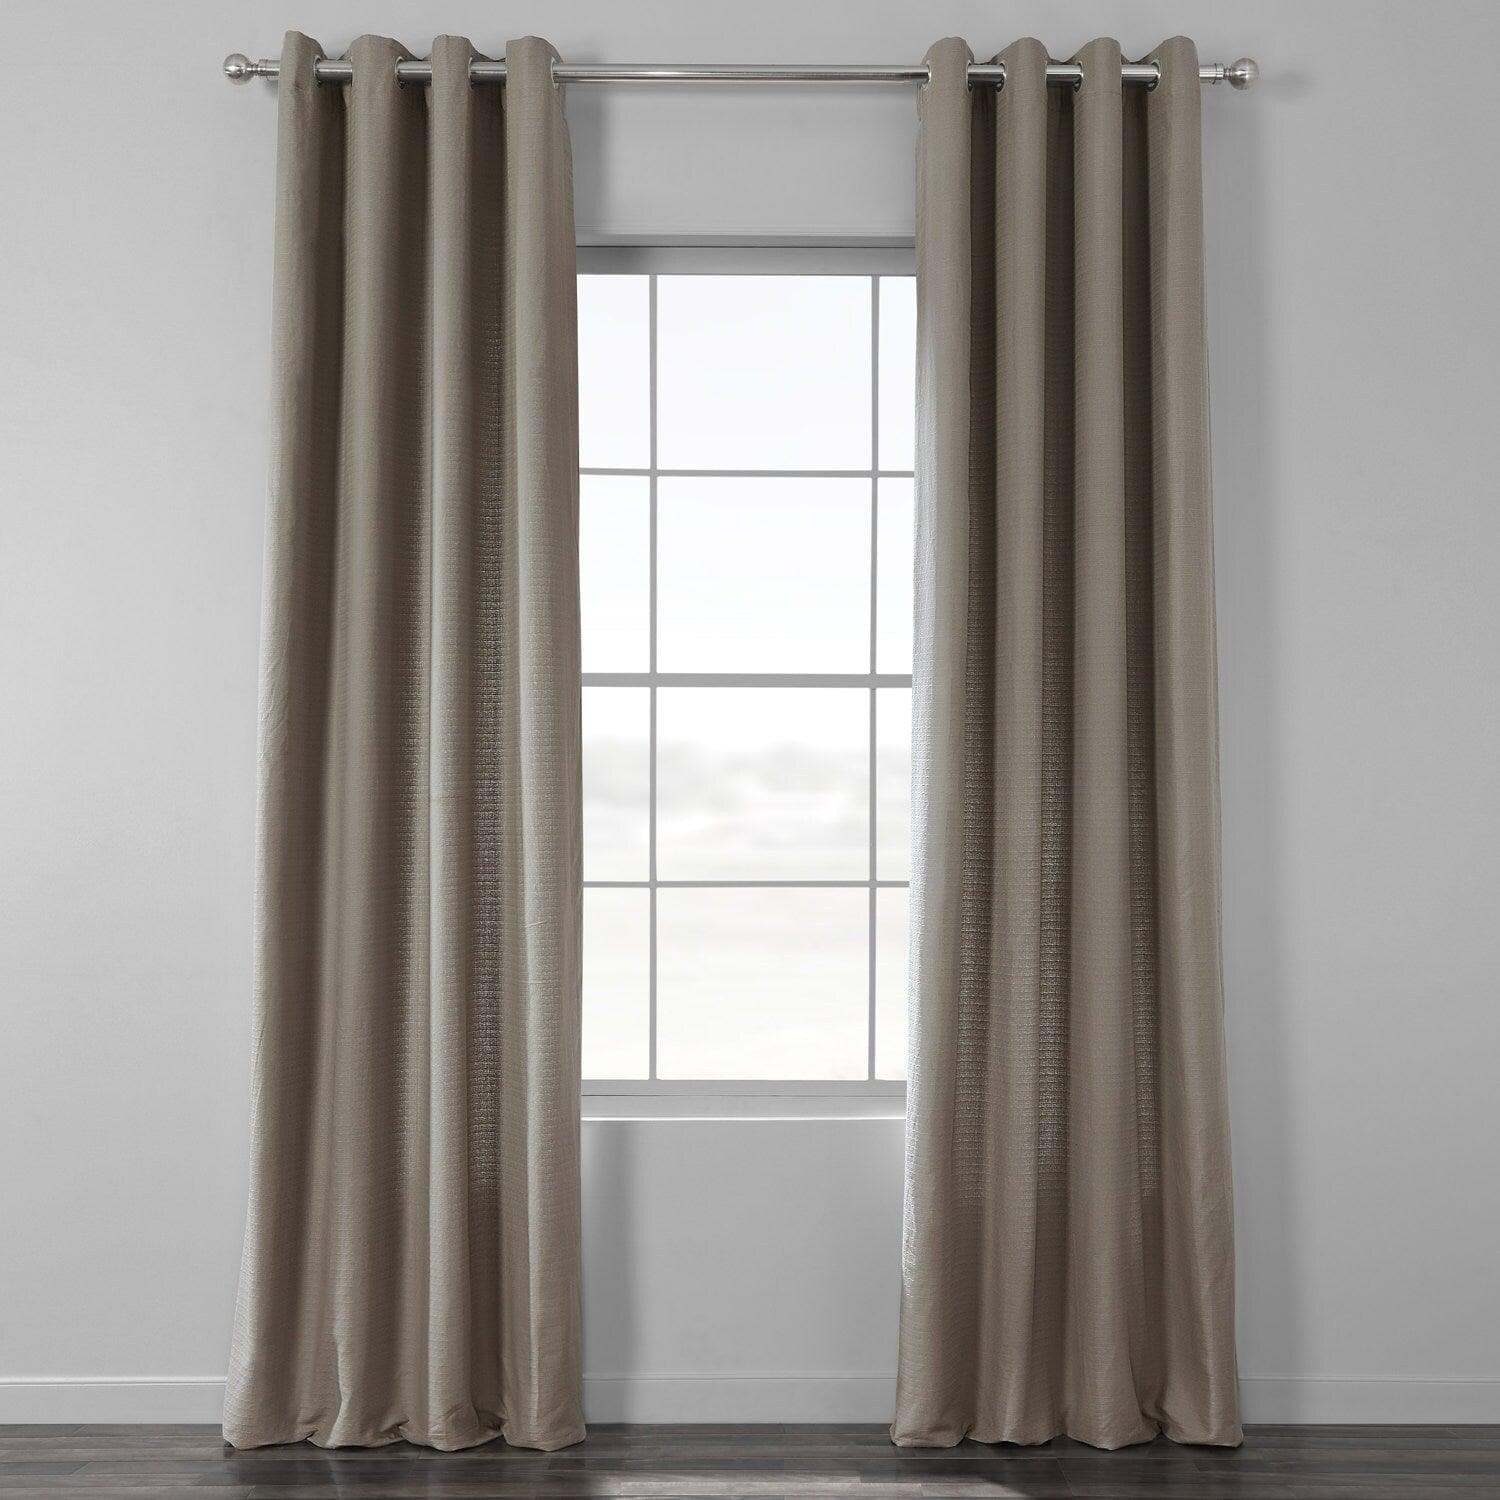 Taupe Grey Grommet Textured Cotton Bark Weave Curtain